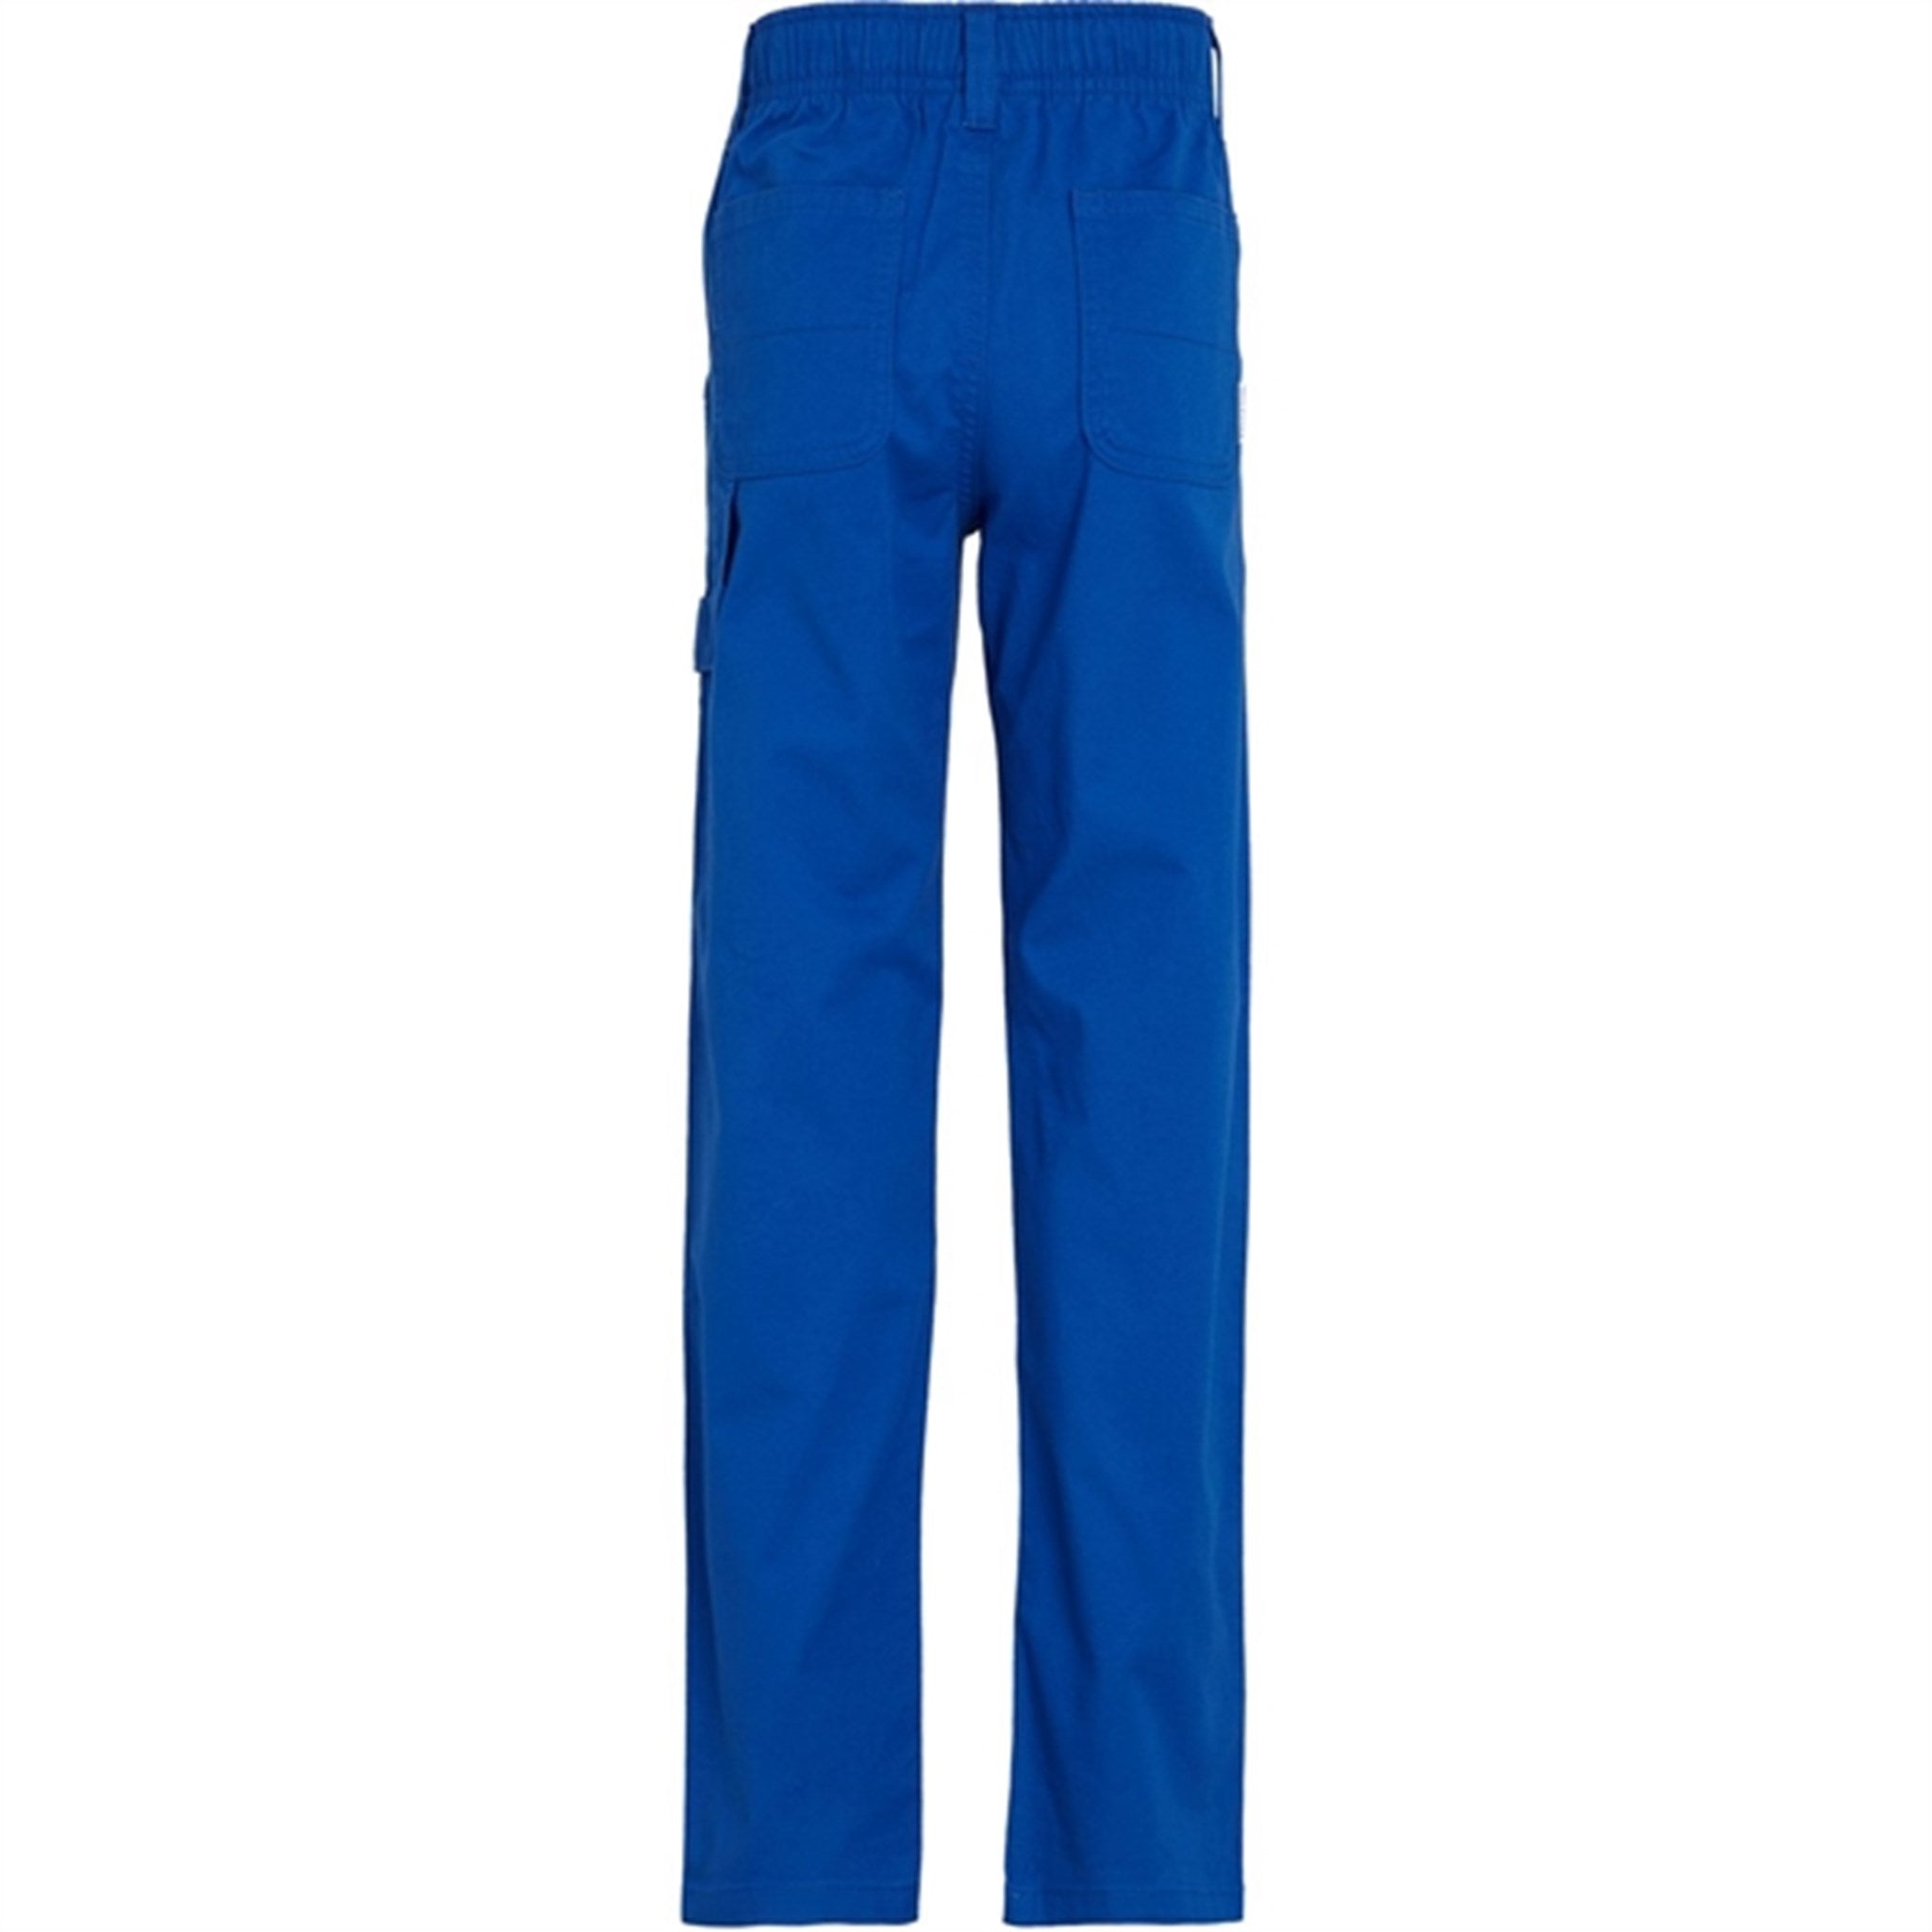 Tommy Hilfiger Skater Pull On Woven Pants Ultra Blue 6